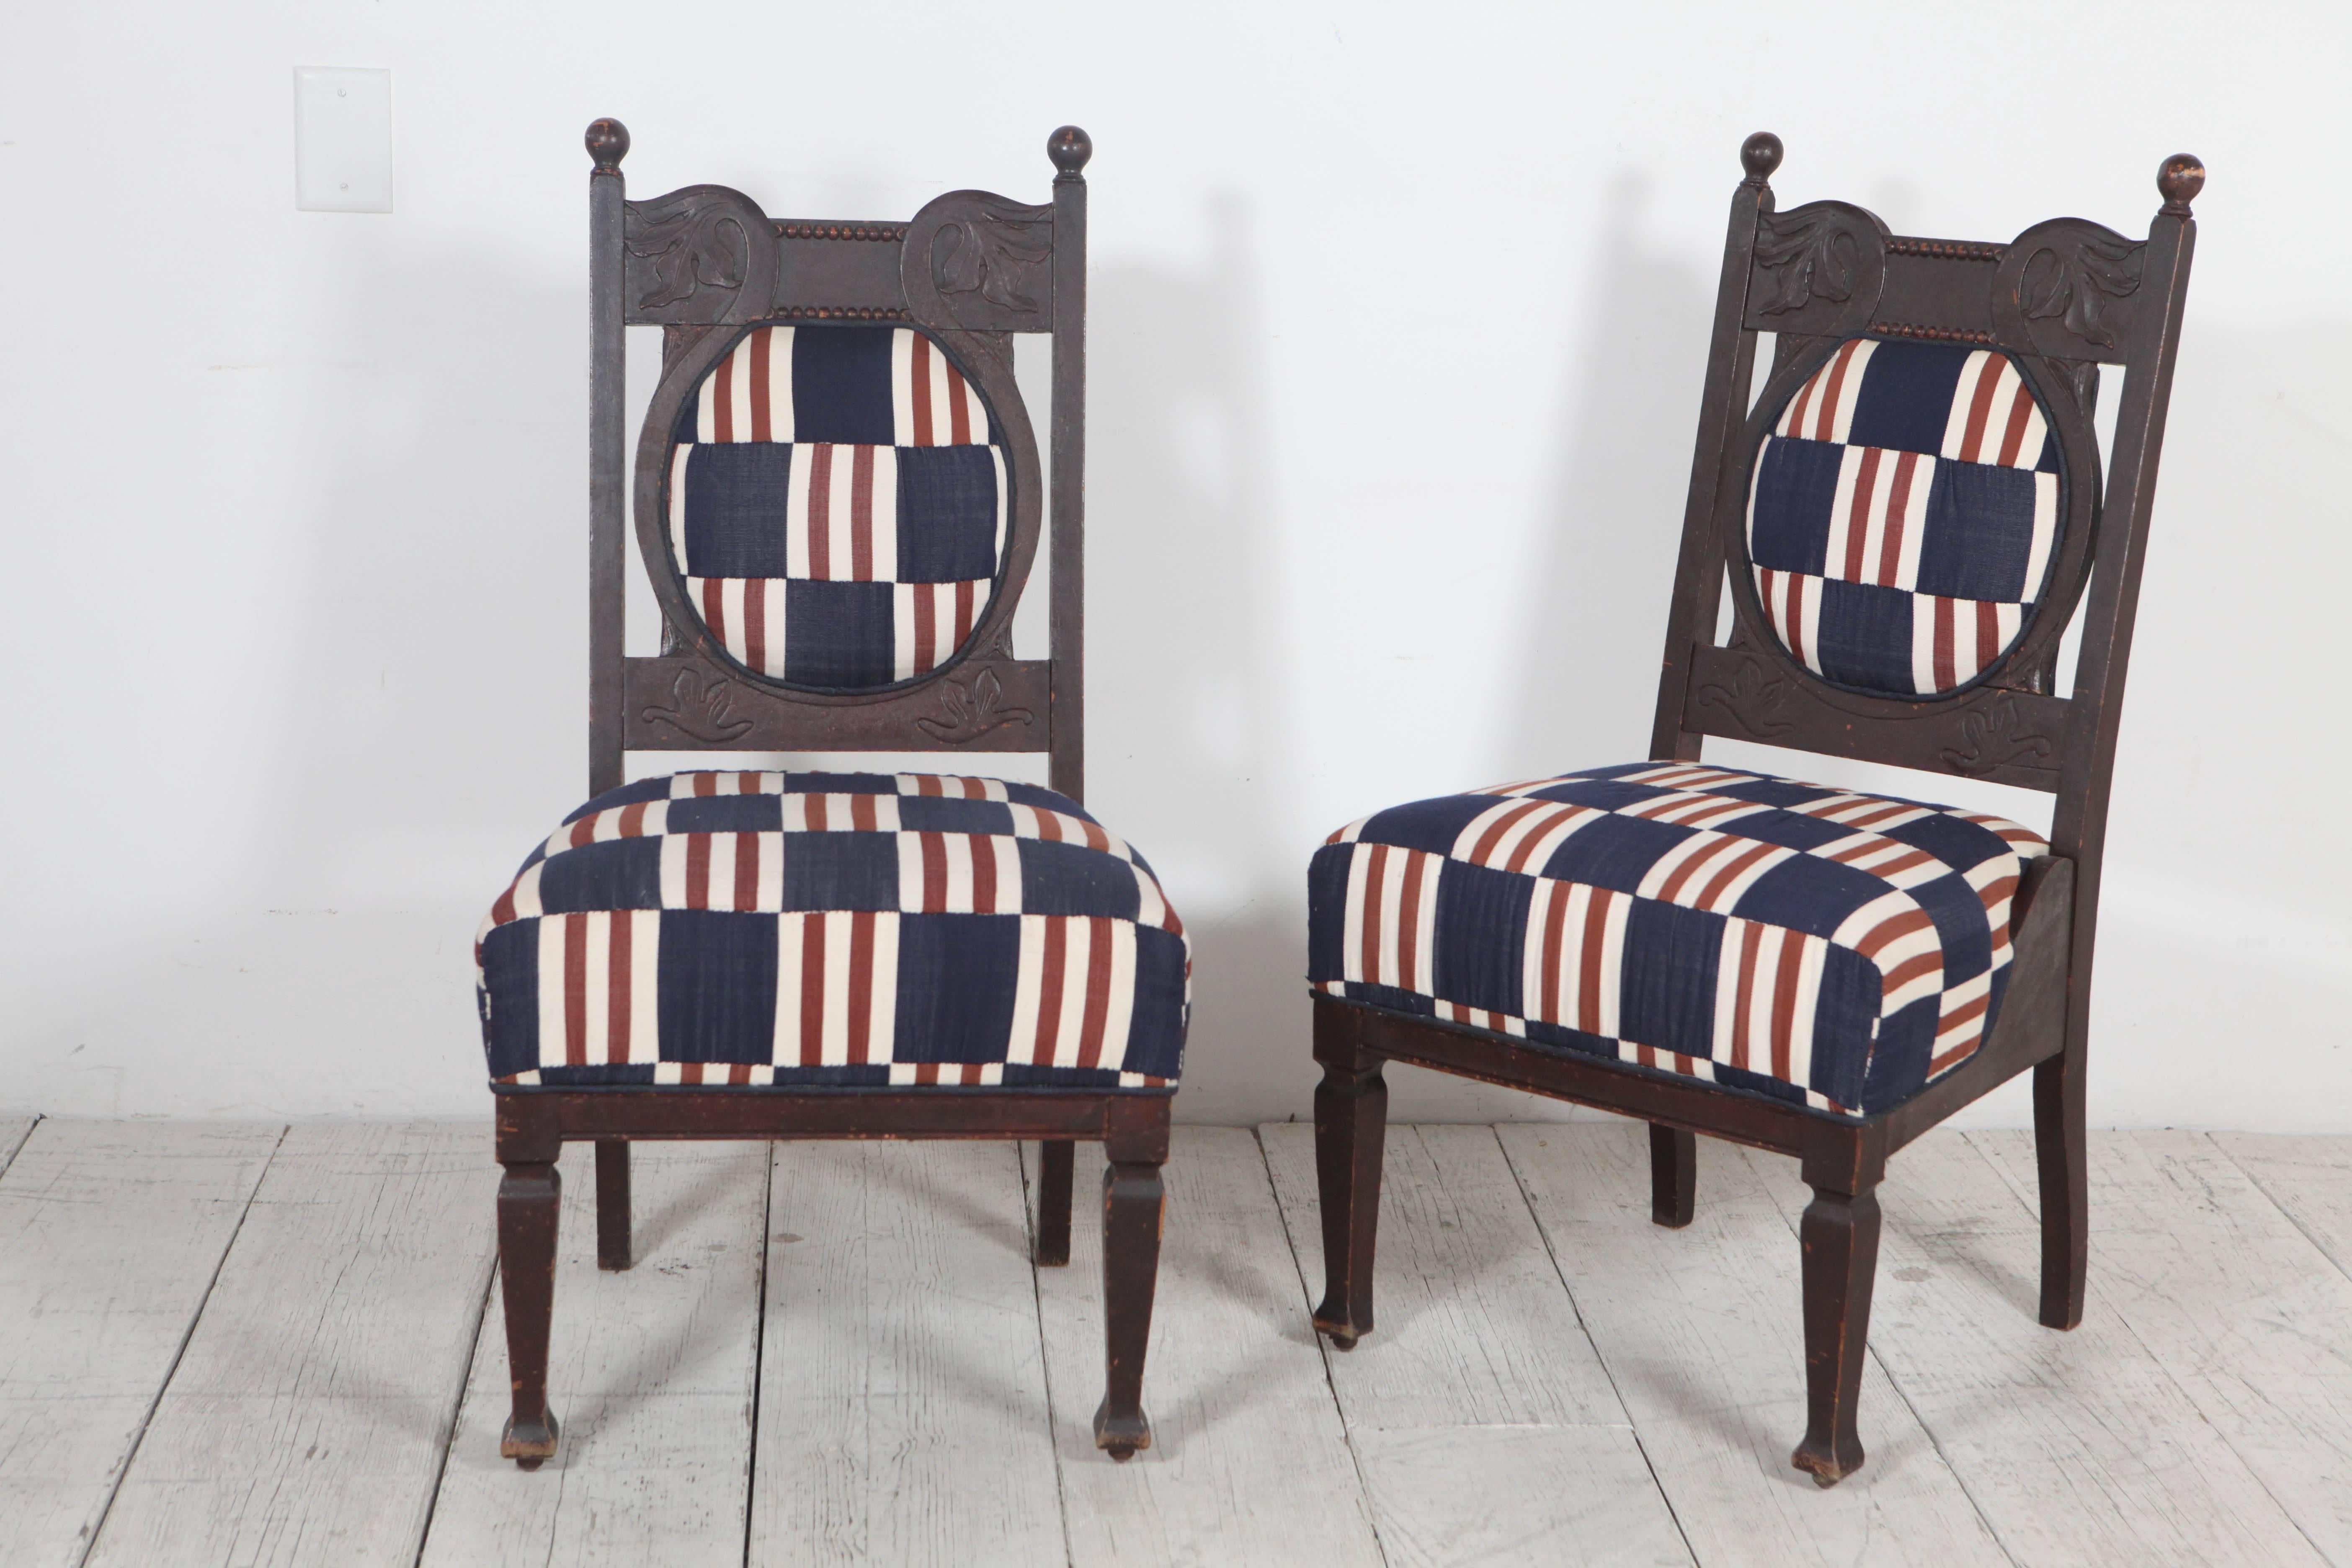 Striking silhouettes with bold graphic patterns and colors on Edwardian style chairs. Sold Individually.